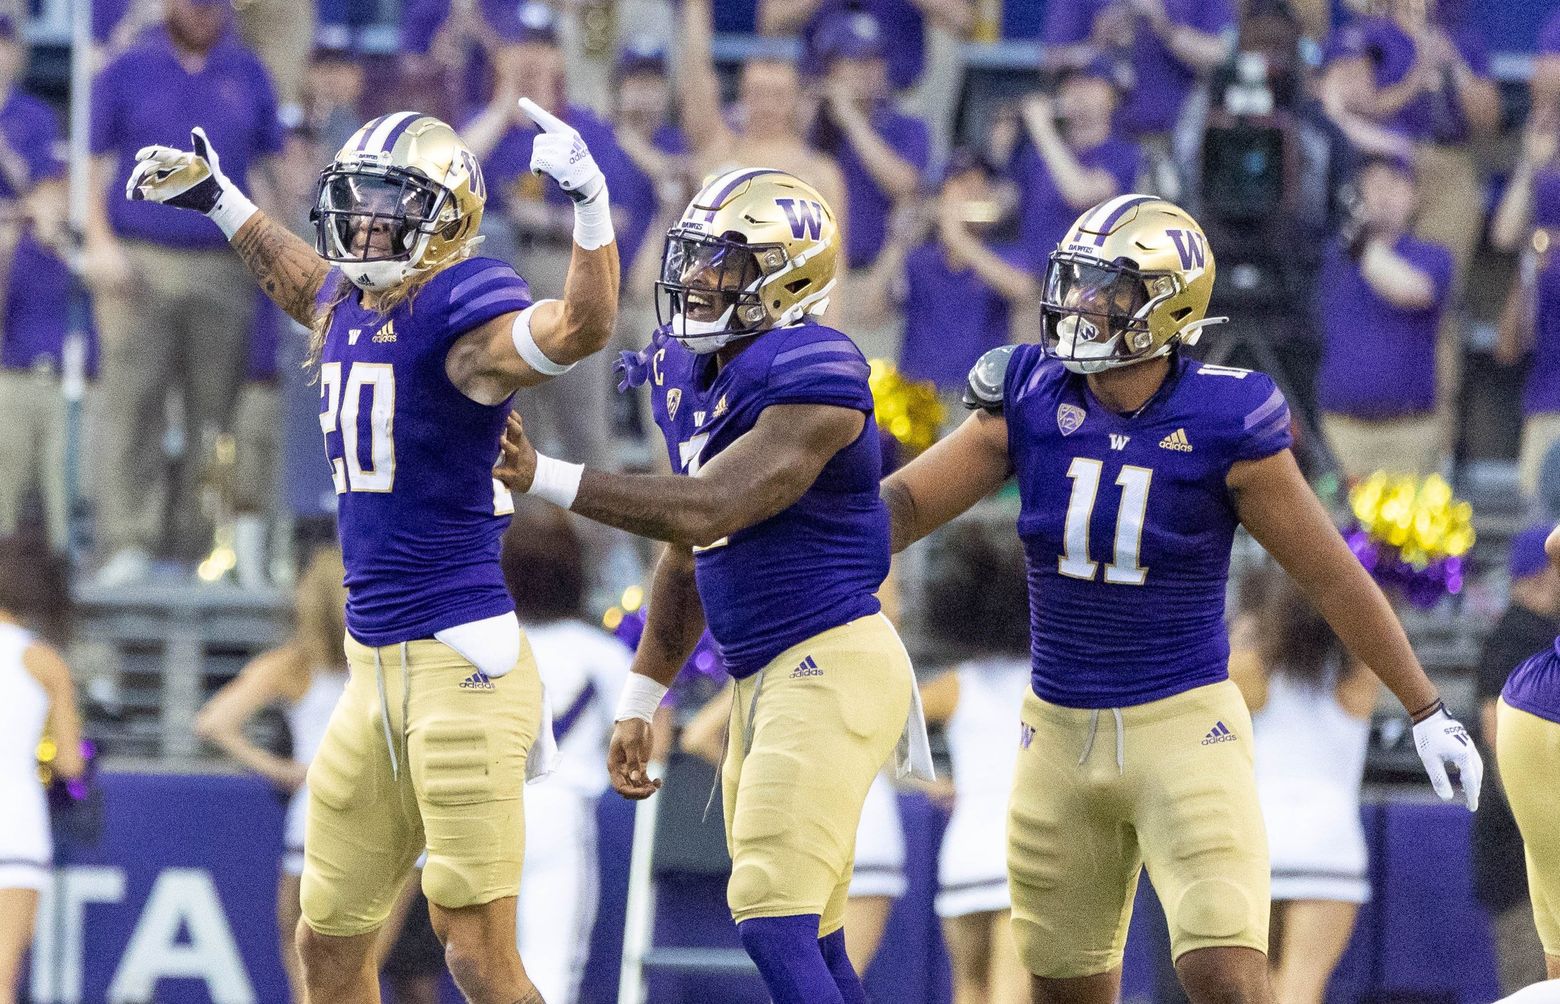 Huskies GameCenter: Live updates, how to watch, stream UW-Kent State | The Seattle Times